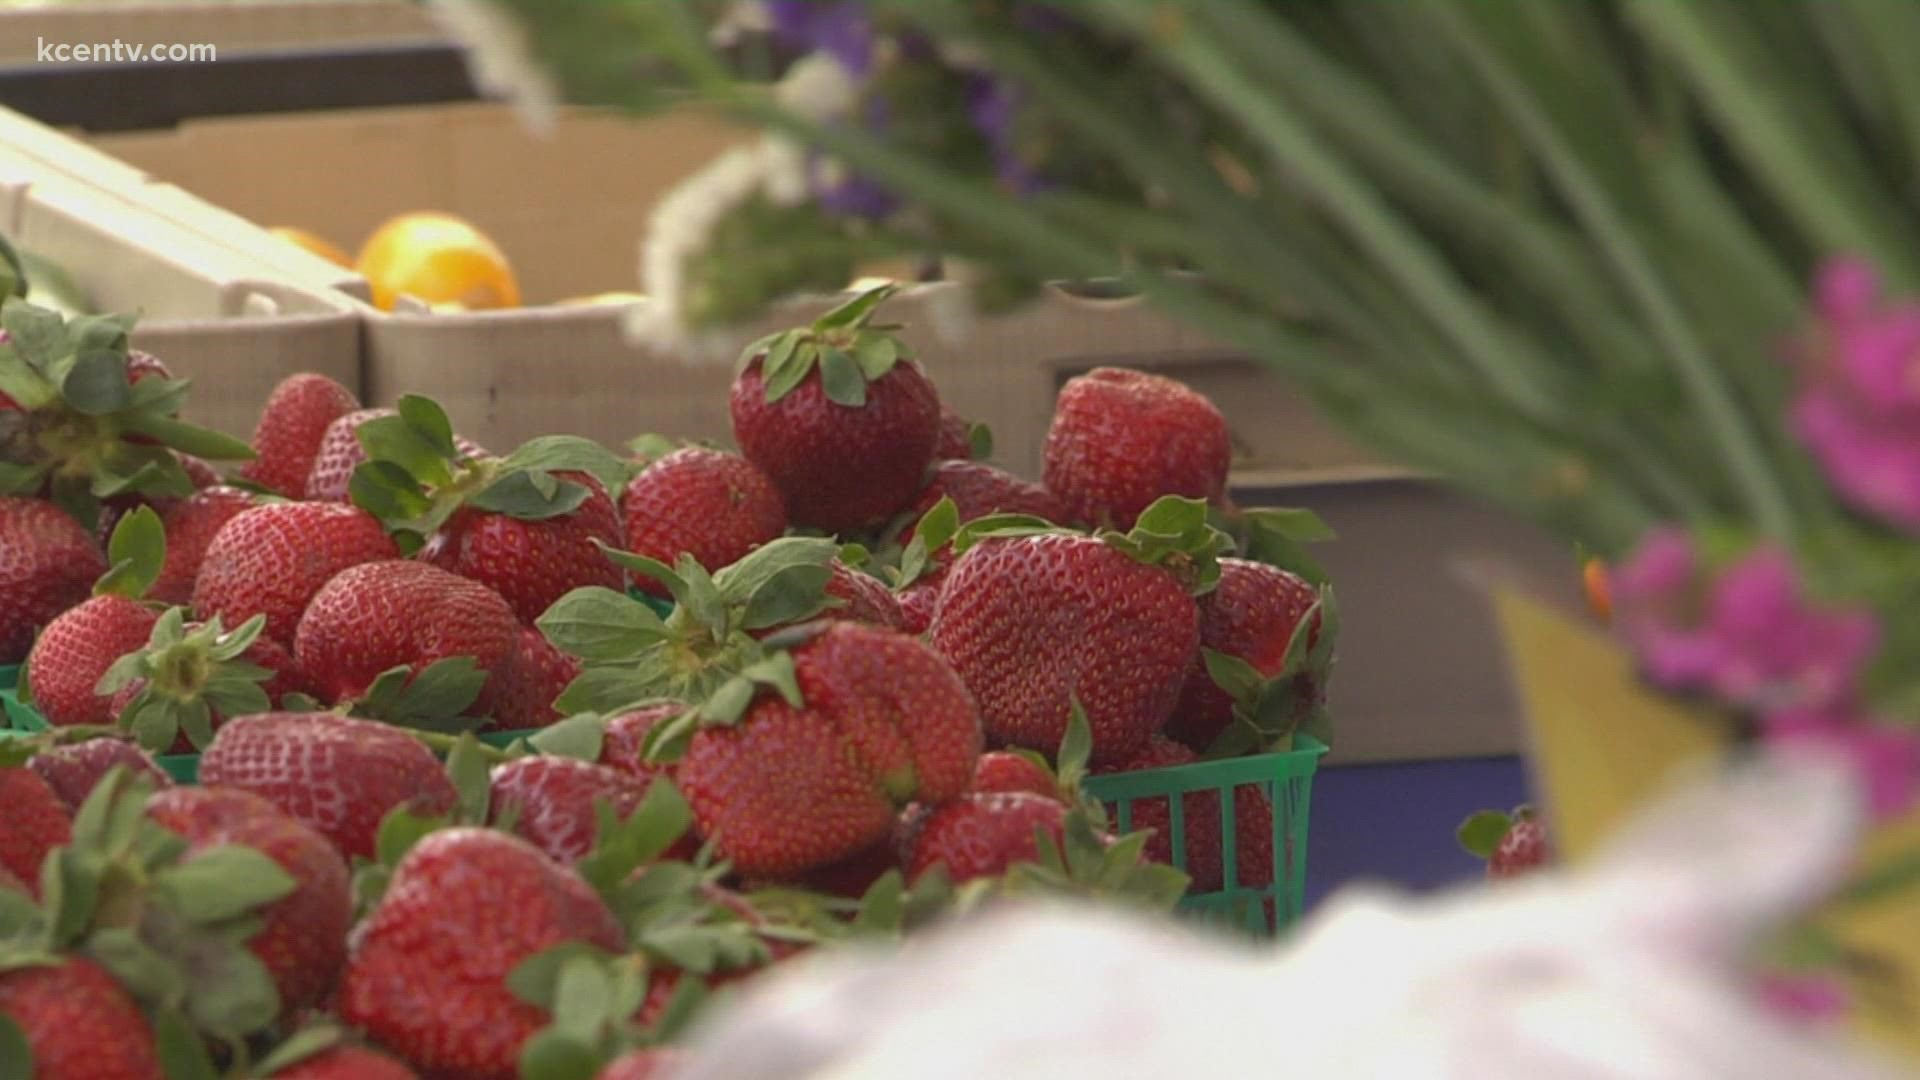 The FDA says the strawberries were sold at, but not limited to Aldi, HEB, Kroger, Safeway, Sprouts, Trader Joe's, Walmart, Weis Markets and WinCo Foods